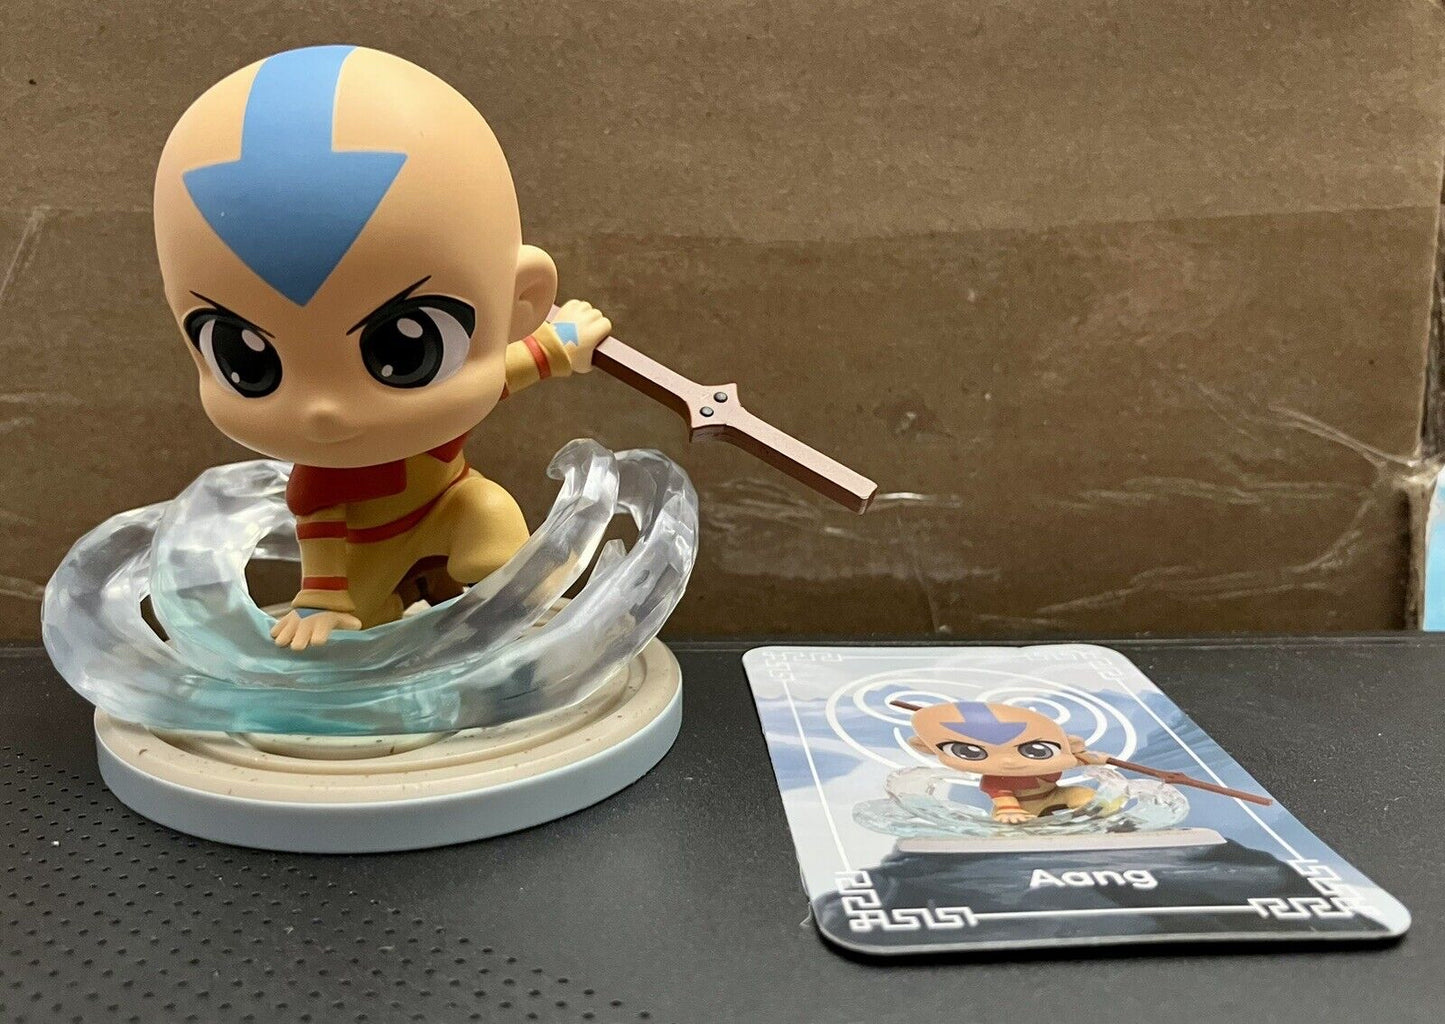 Avatar The Last Airbender: Mystery Box Figures